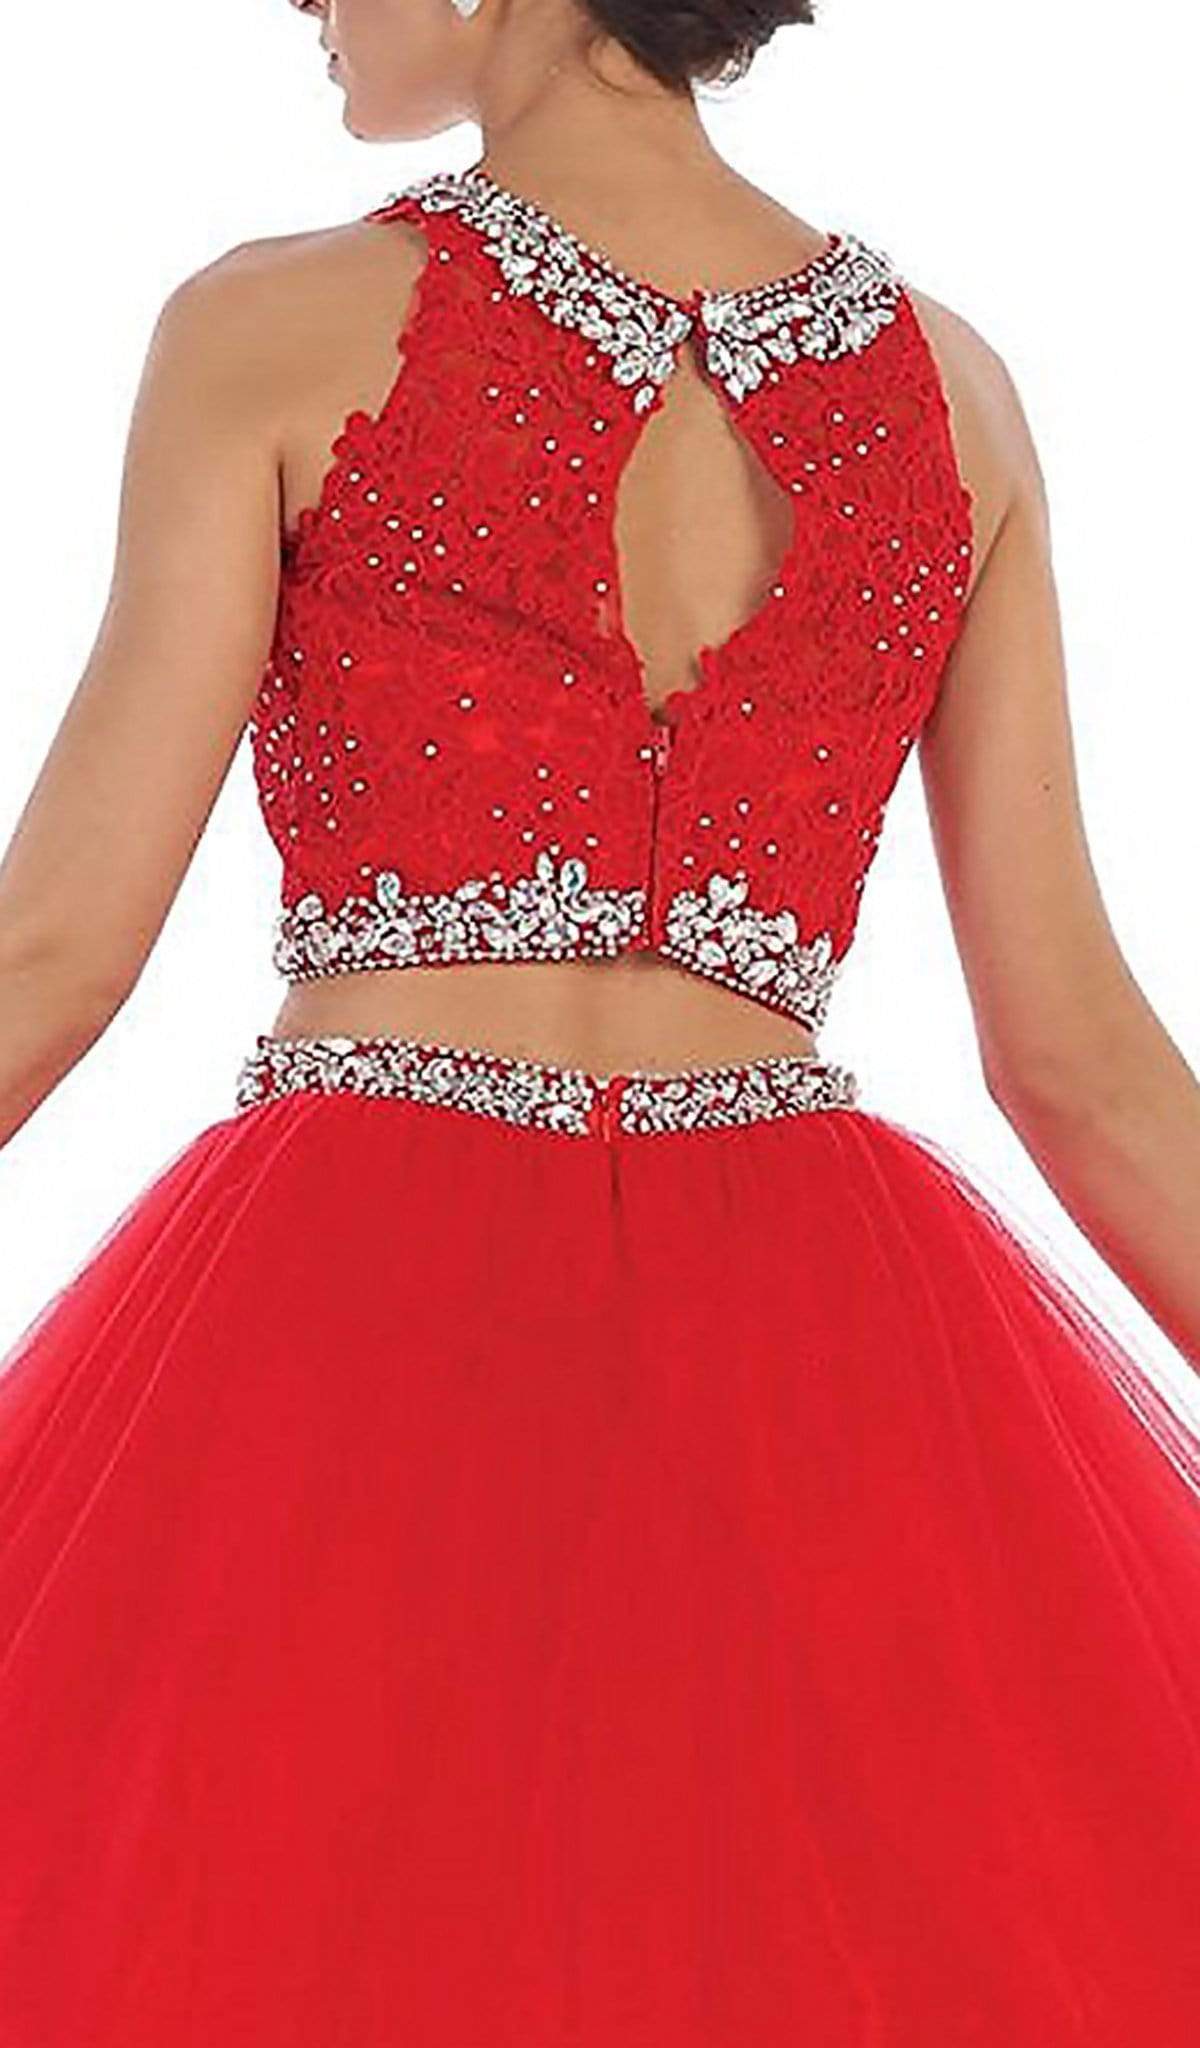 May Queen - Two Piece Beaded Jewel Quinceanera Ballgown Special Occasion Dress